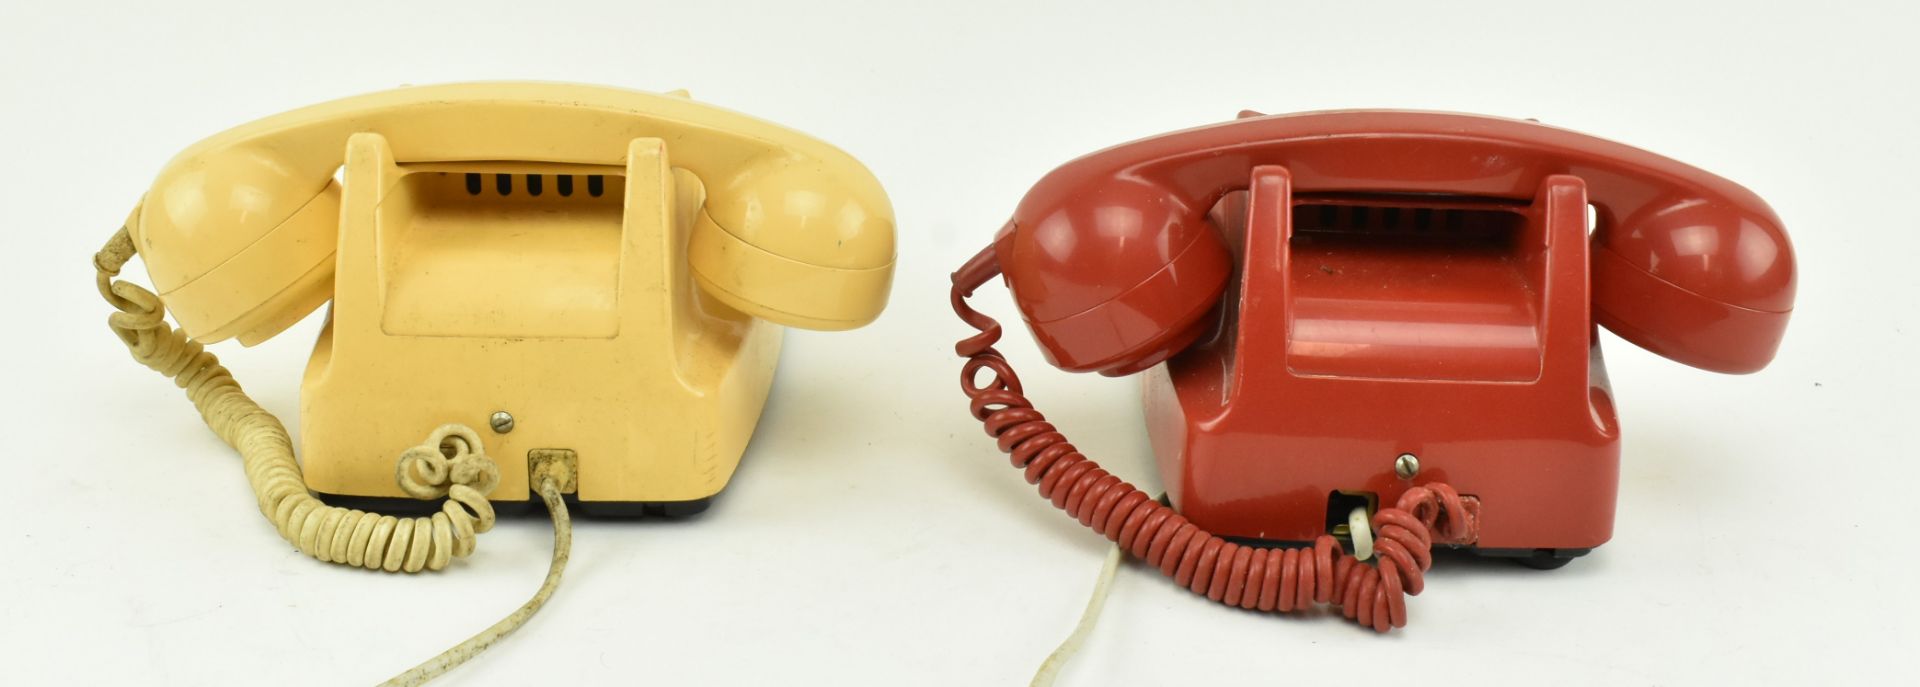 TWO VINTAGE G. P. O. ROTARY DIAL TELEPHONES, ONE RED ONE CREAM - Bild 5 aus 7